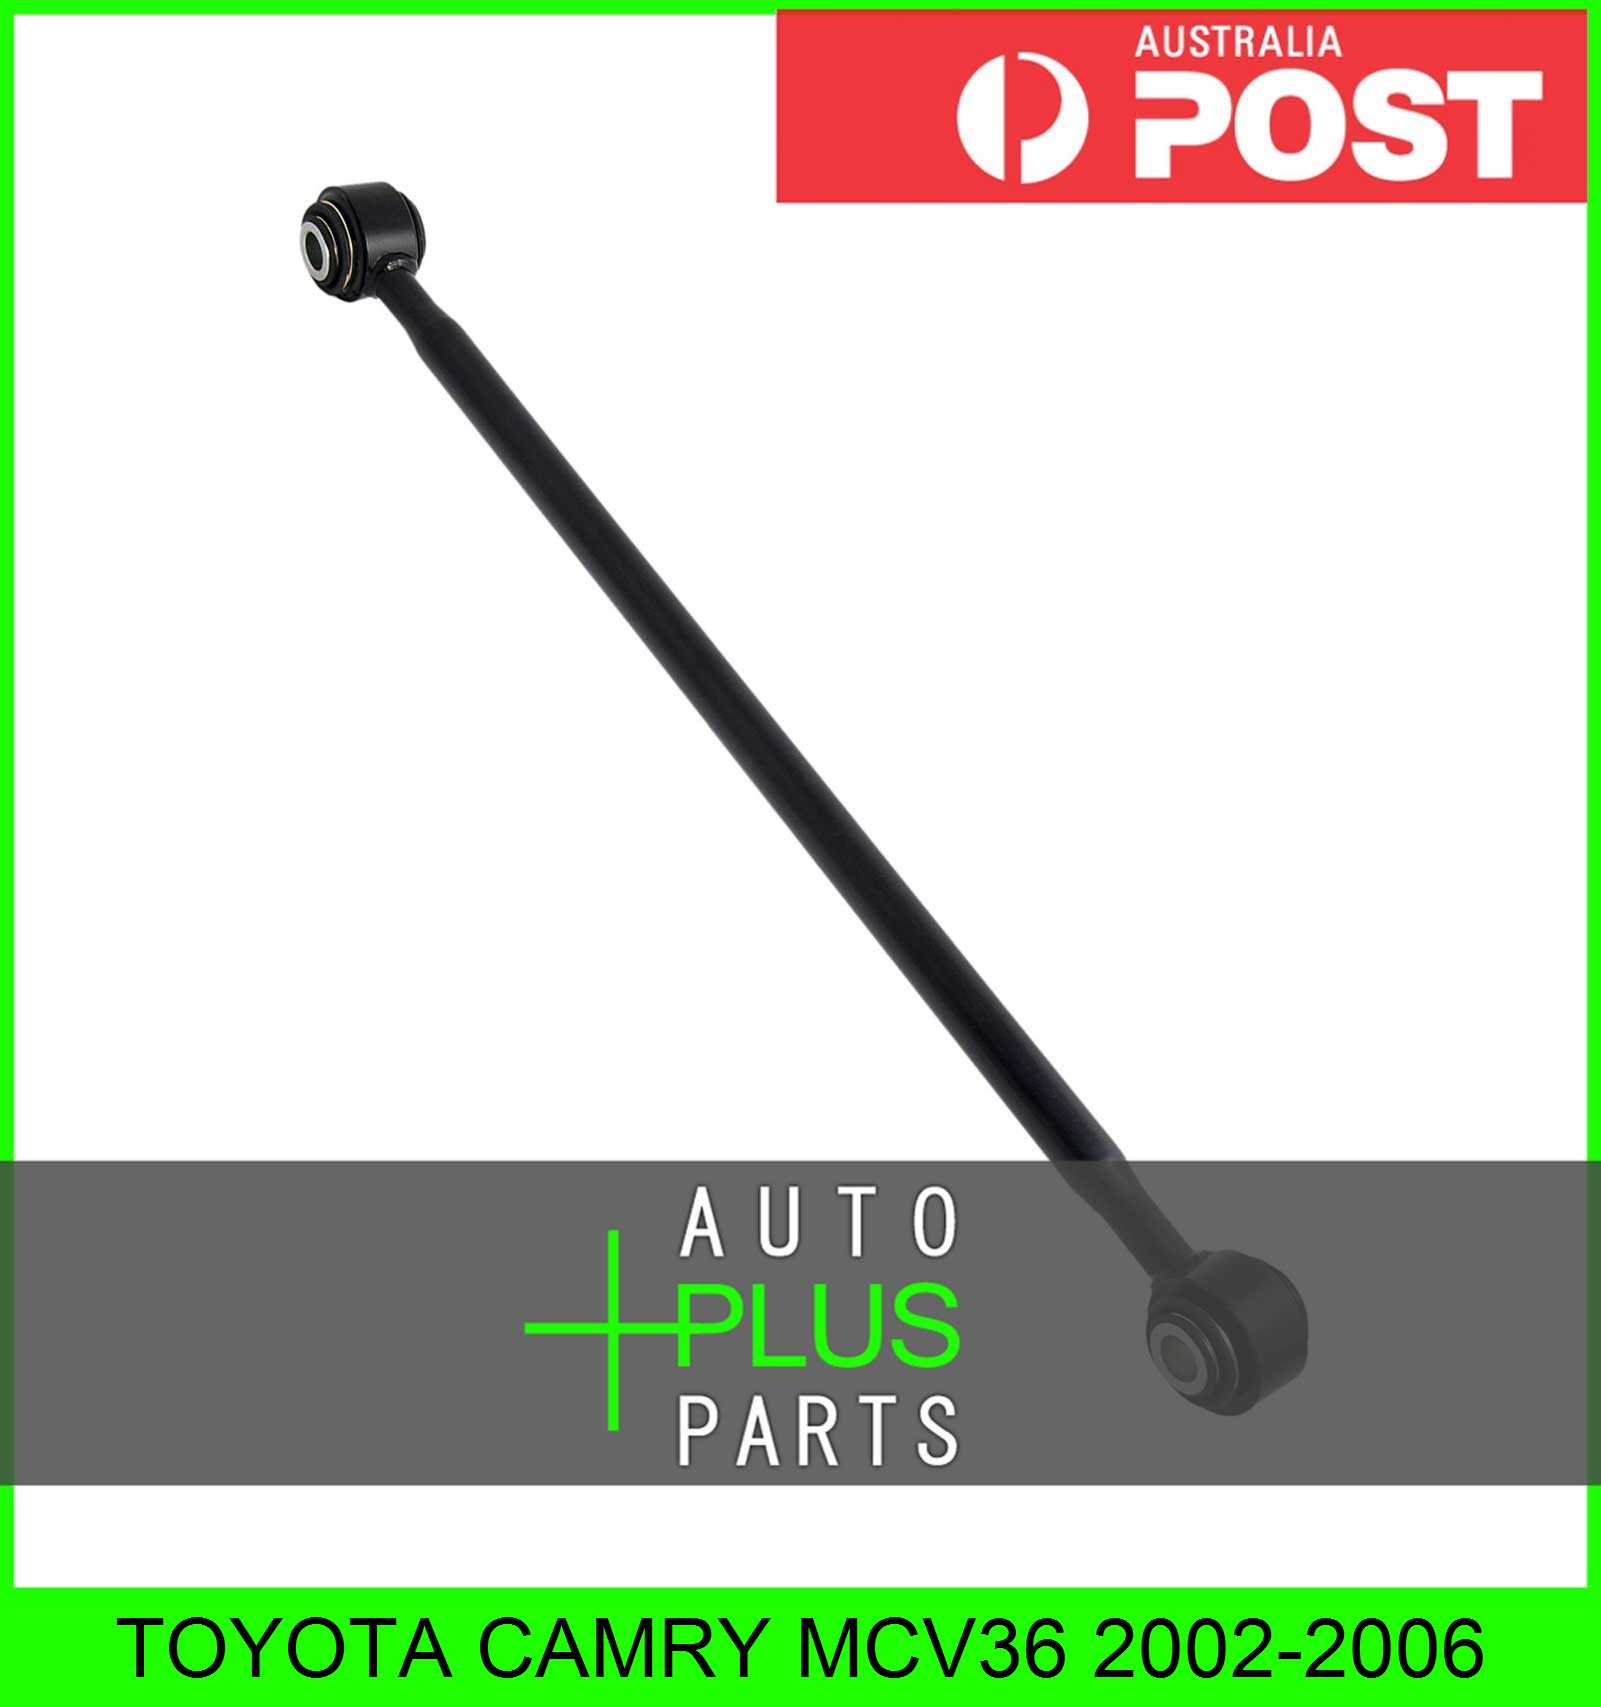 Fits TOYOTA CAMRY MCV36 Rear Track Control Rod Product Photo